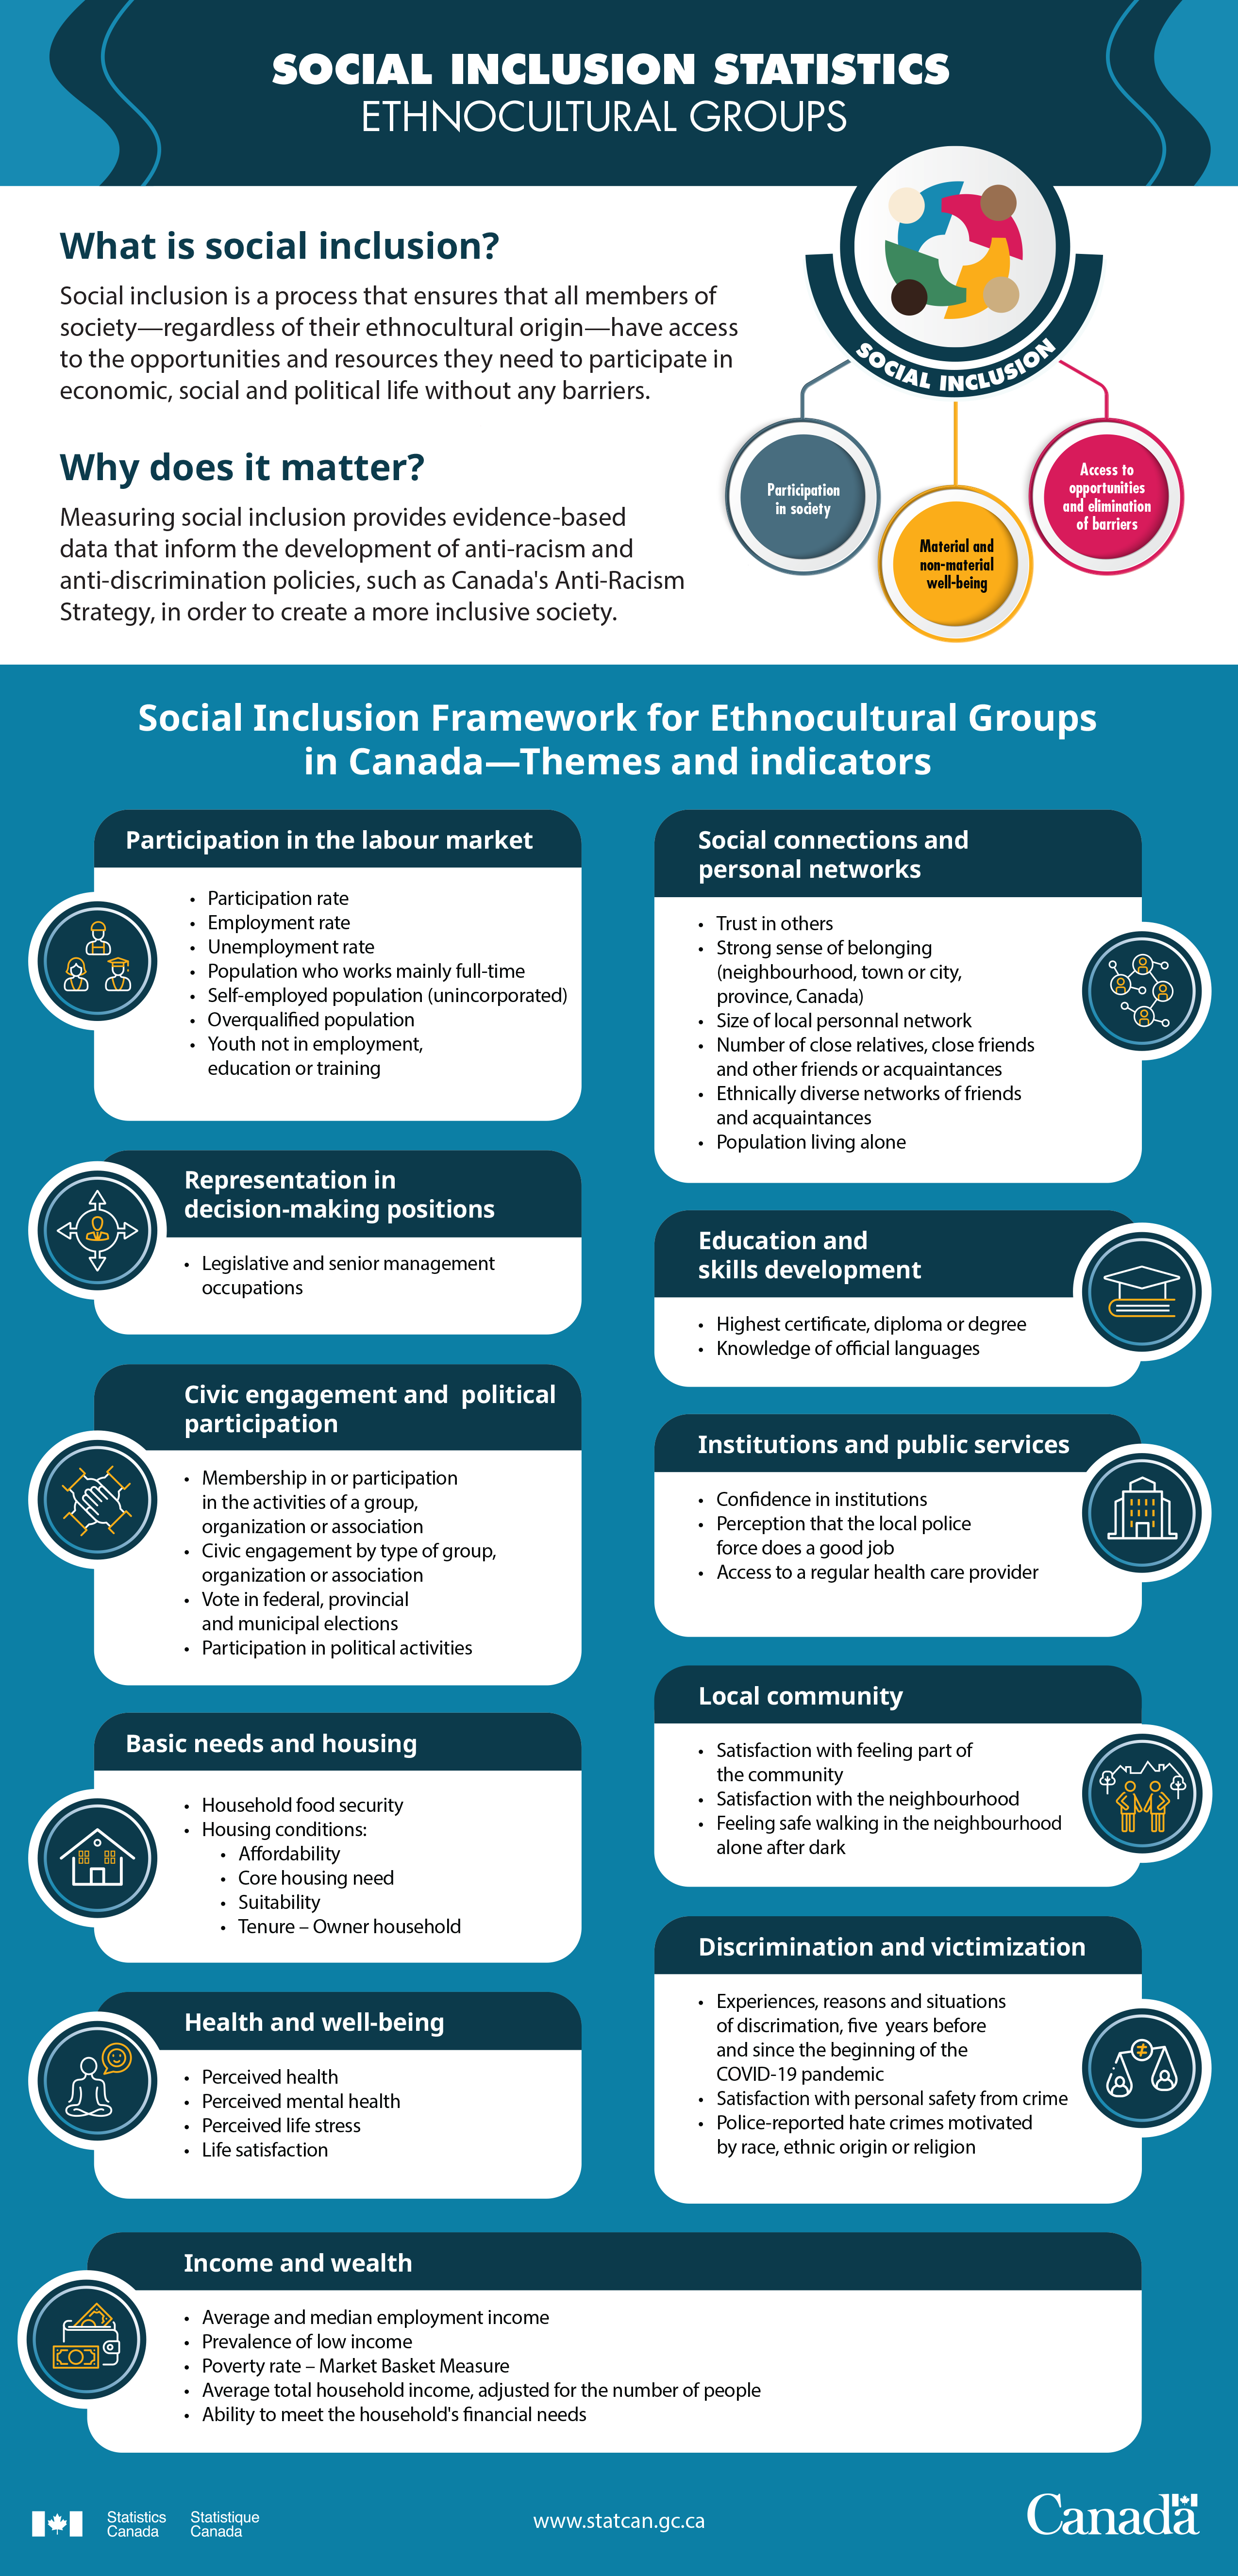 Social Inclusion Framework for Ethnocultural Groups in Canada